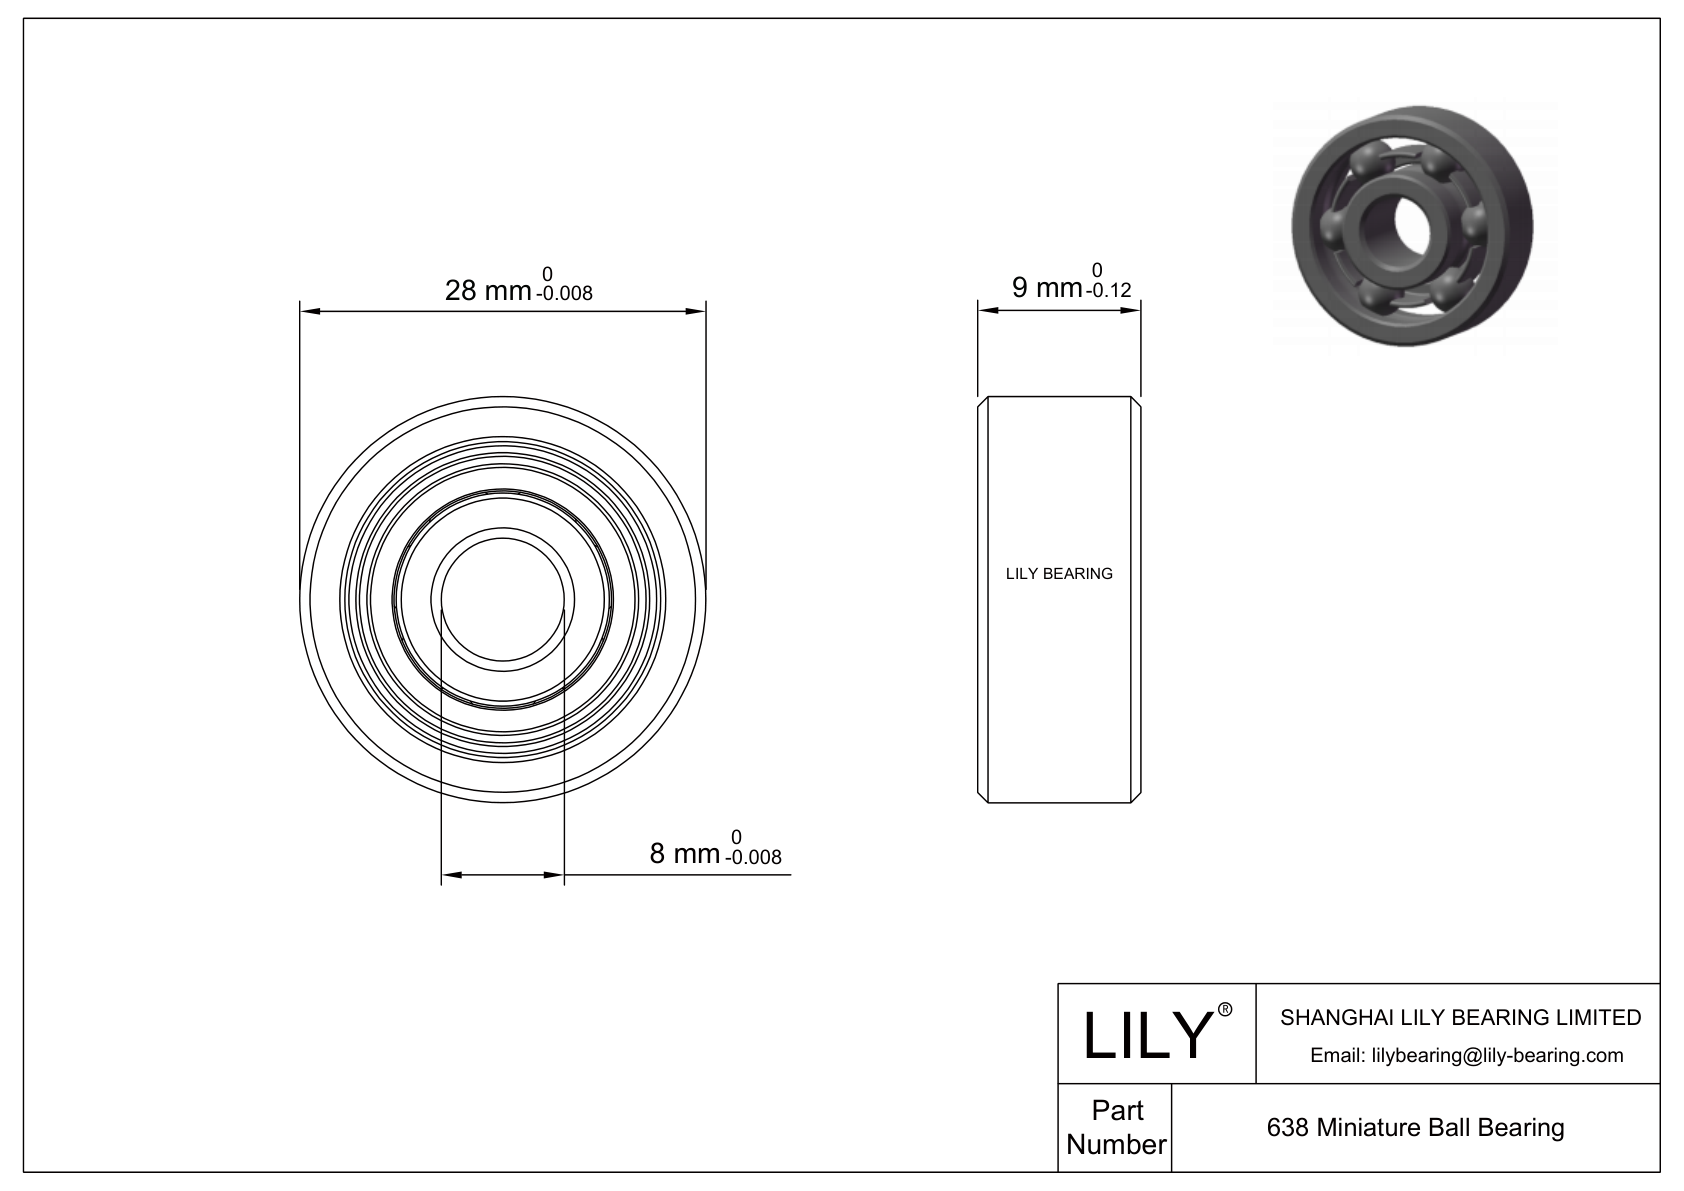 LILY-PU63840-20C1L10M8 Polyurethane Coated Bearing With Screw cad drawing